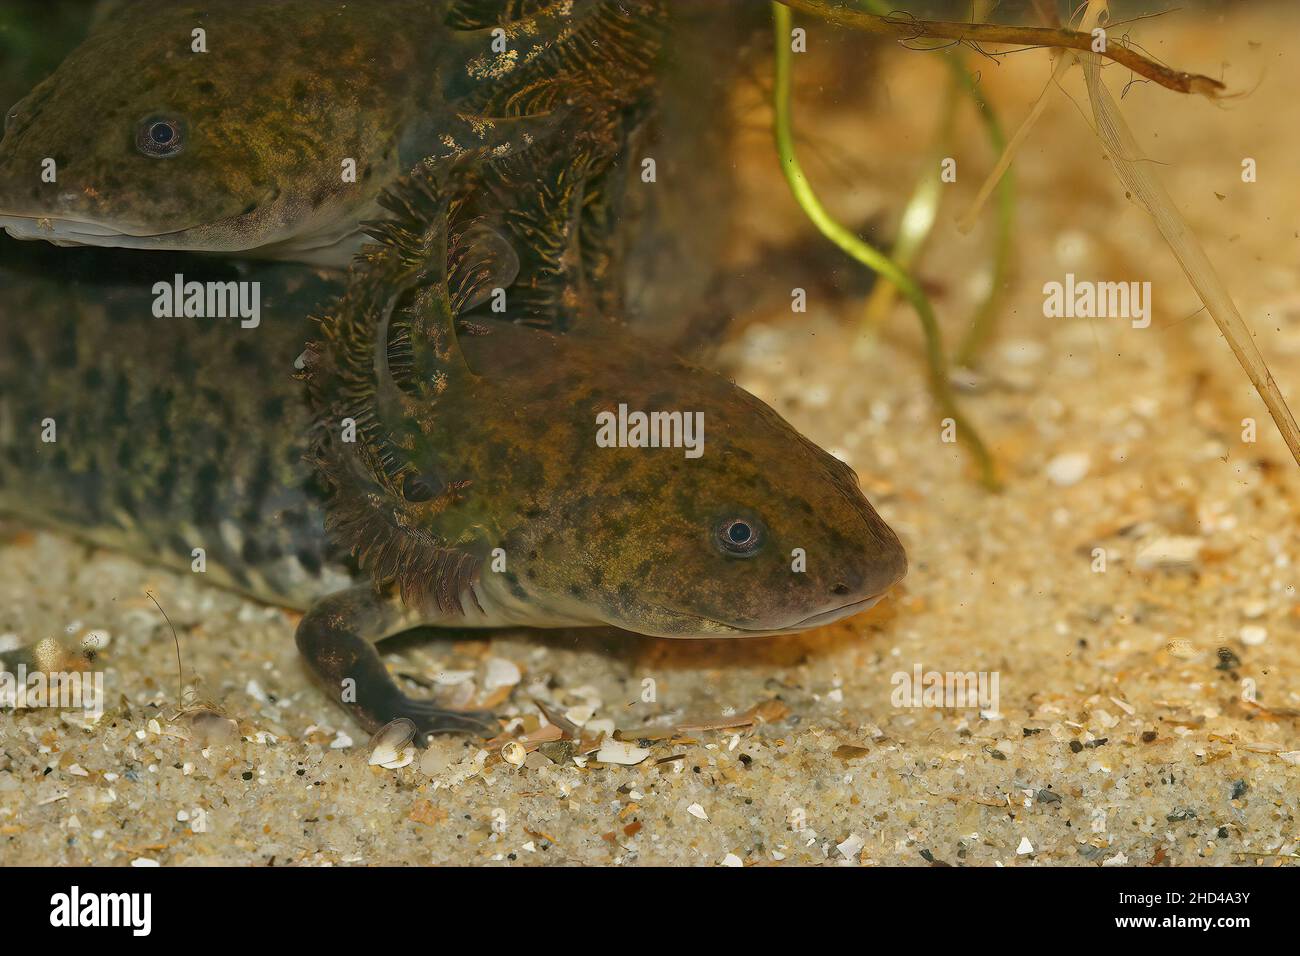 Closeup on the critically endangered neotenic Ambystoma andersoni salamanders from Zacapu Lagoon in the Mexican state of Michoacan, underwater Stock Photo